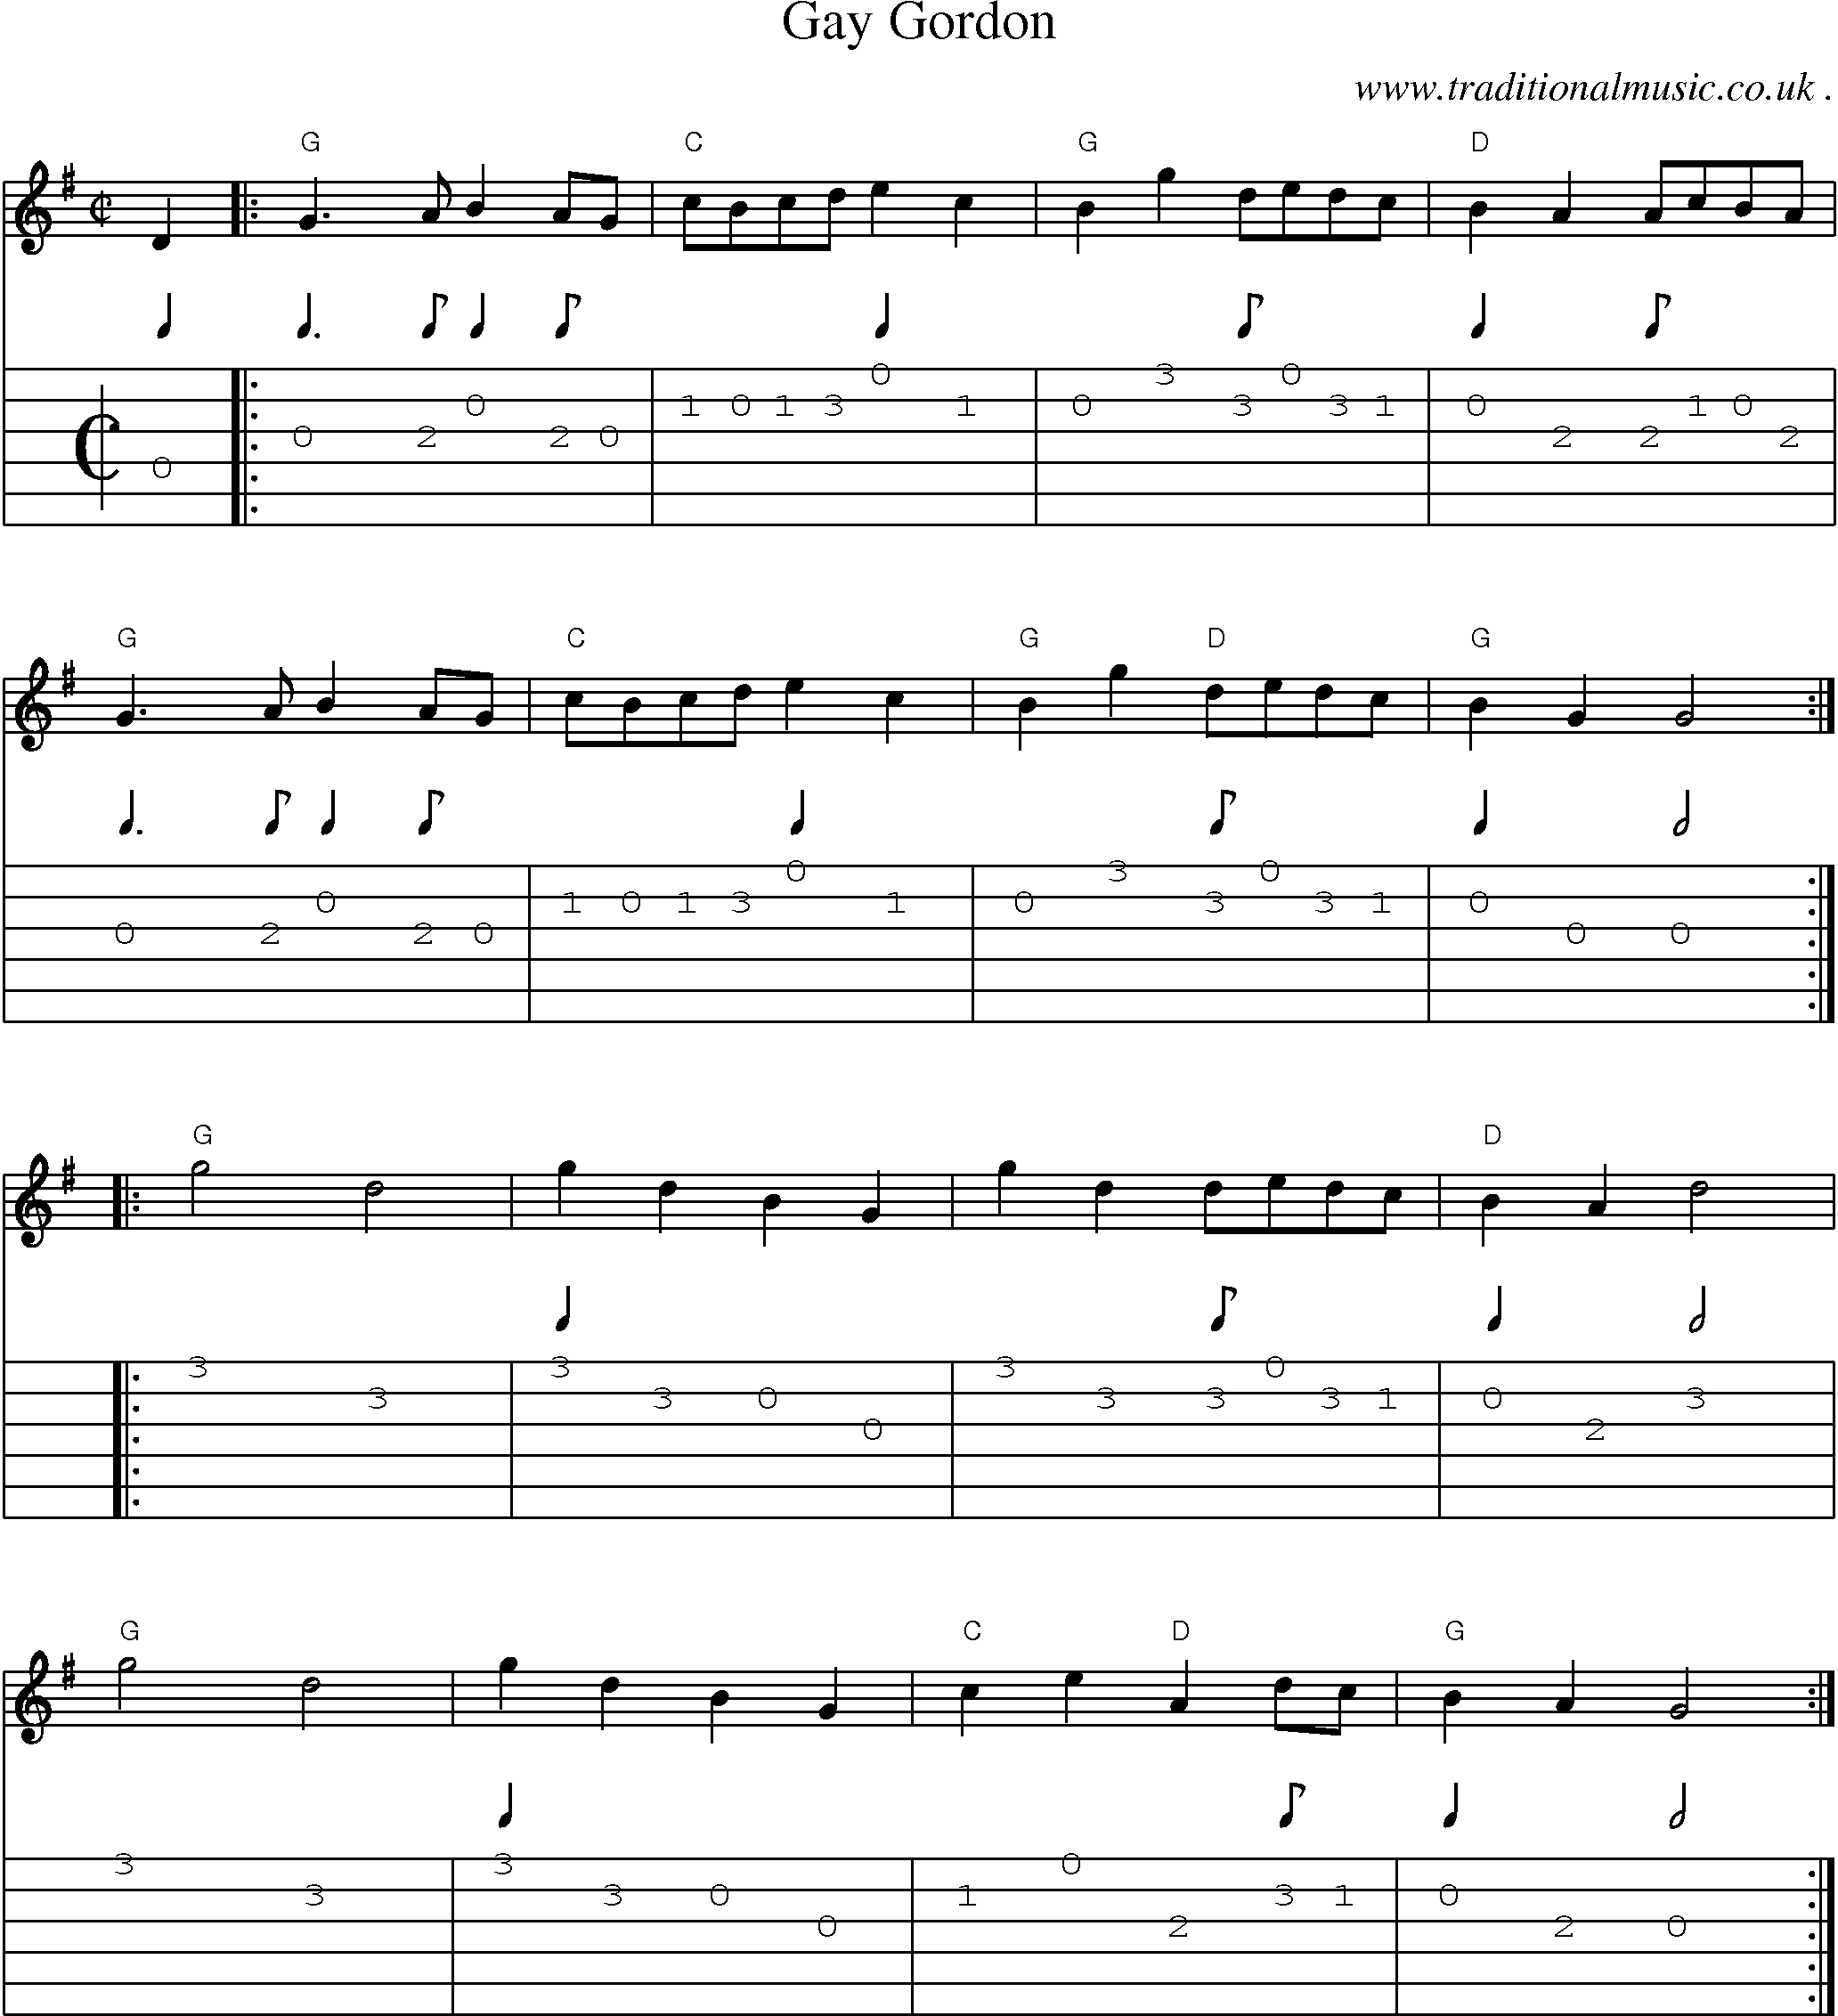 Music Score and Guitar Tabs for Gay Gordon